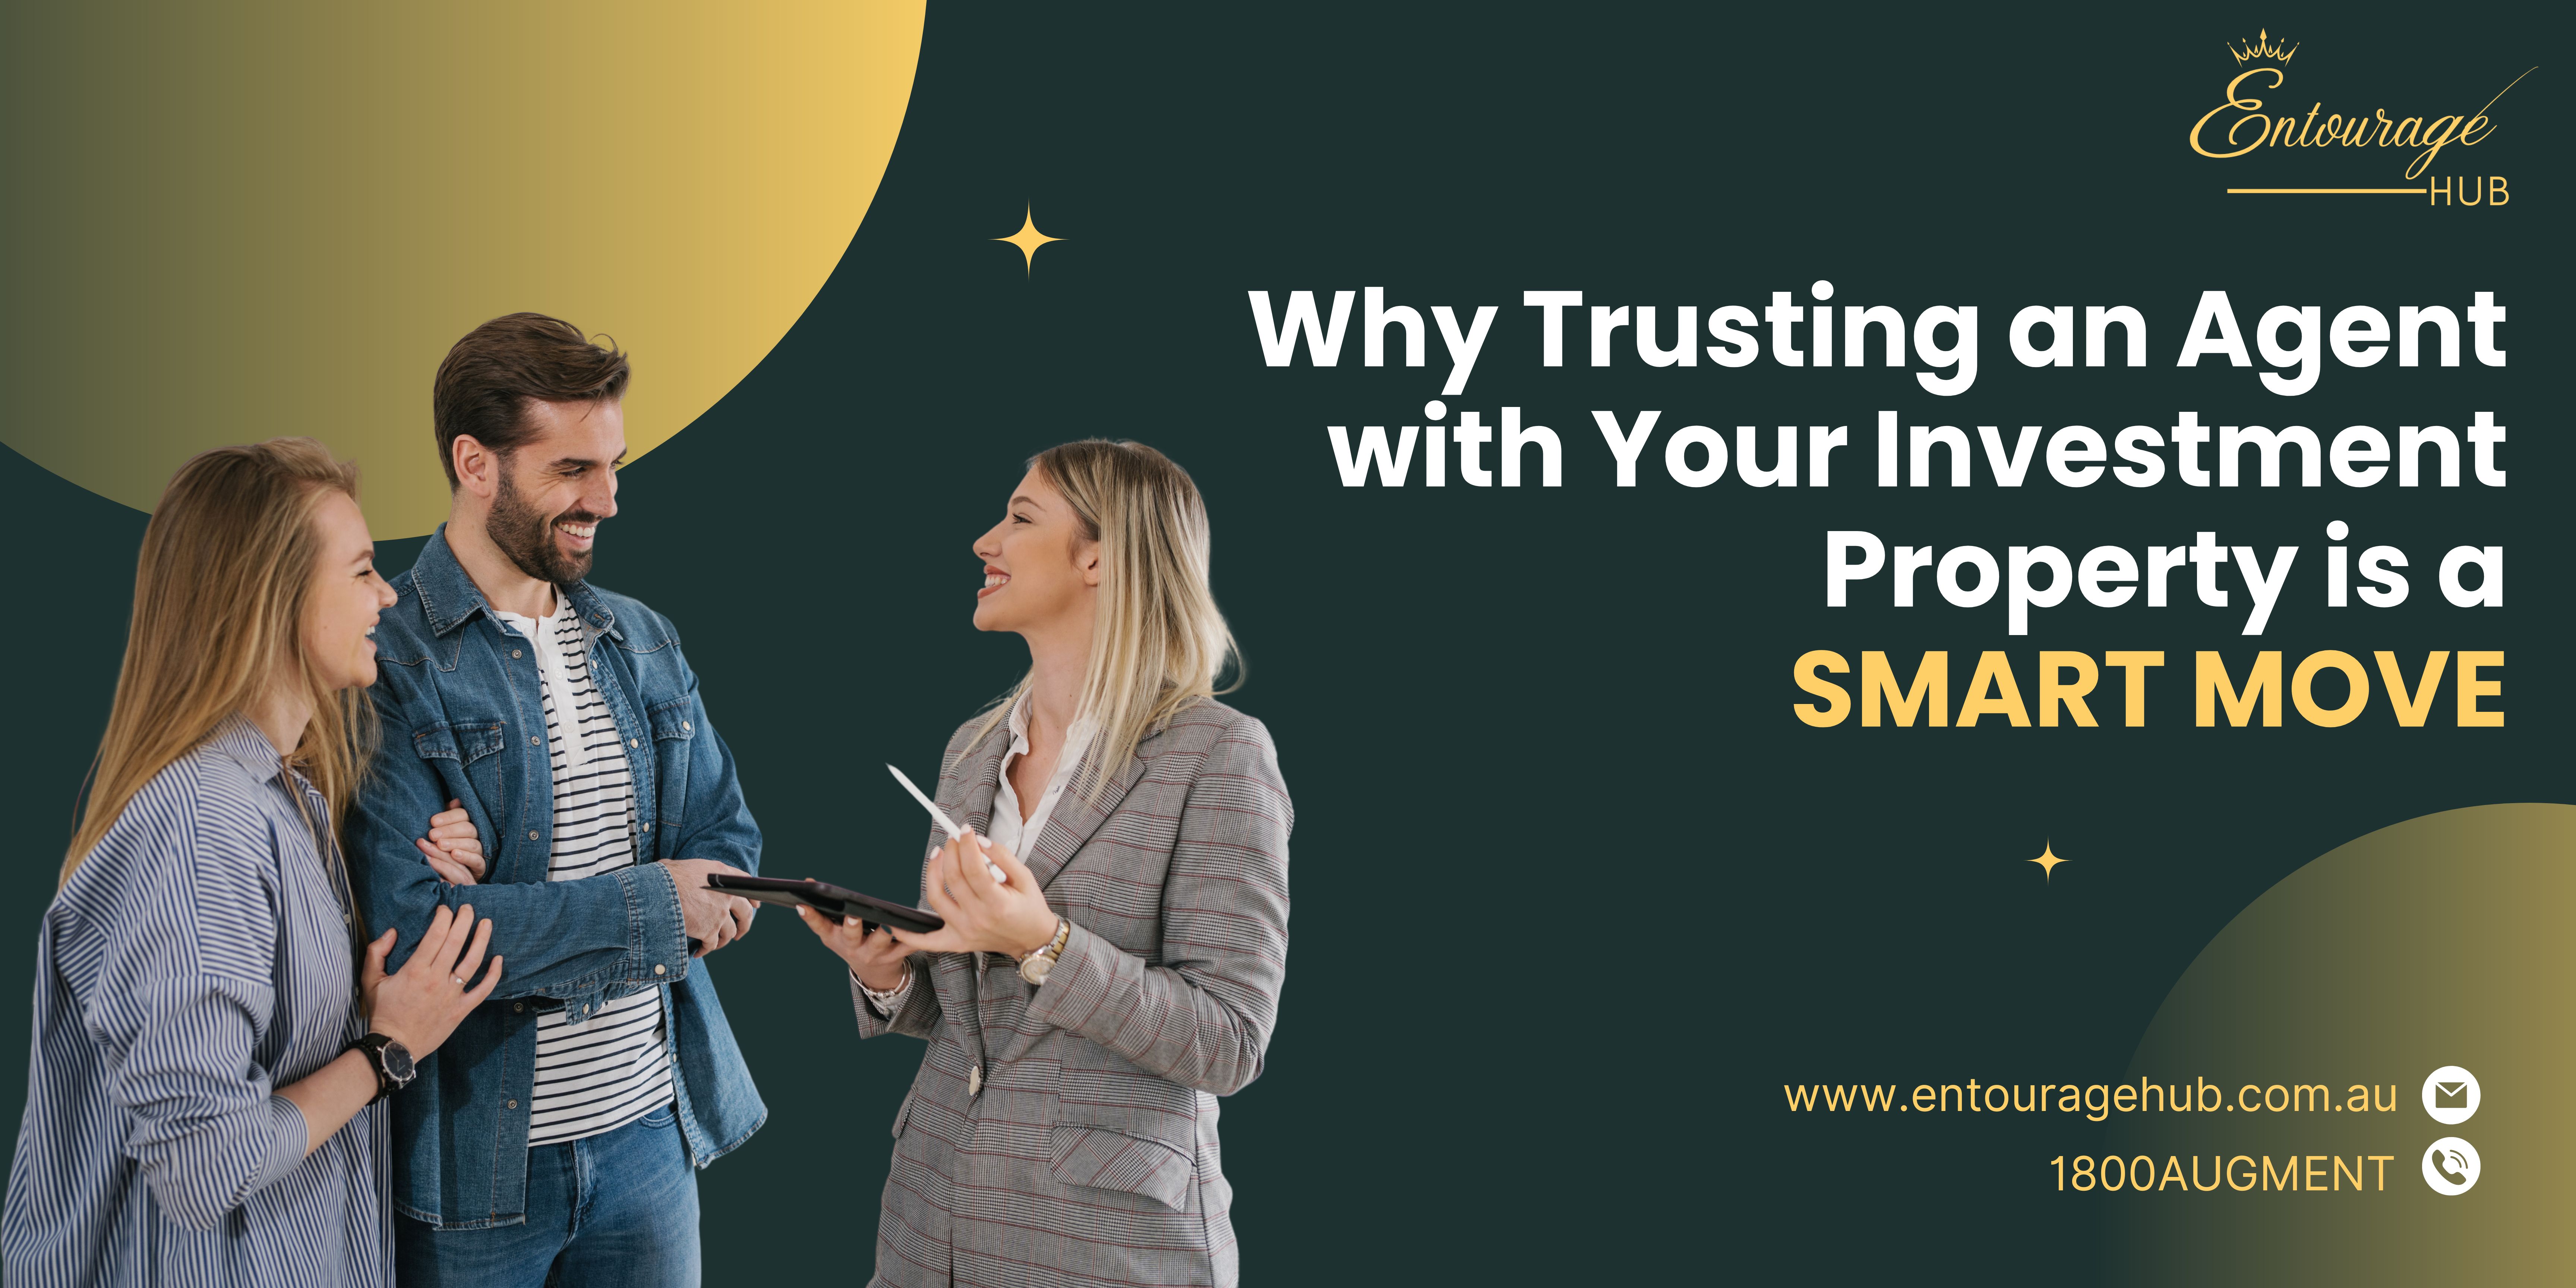 Why Trusting an Agent with Your Investment Property is a Smart Move